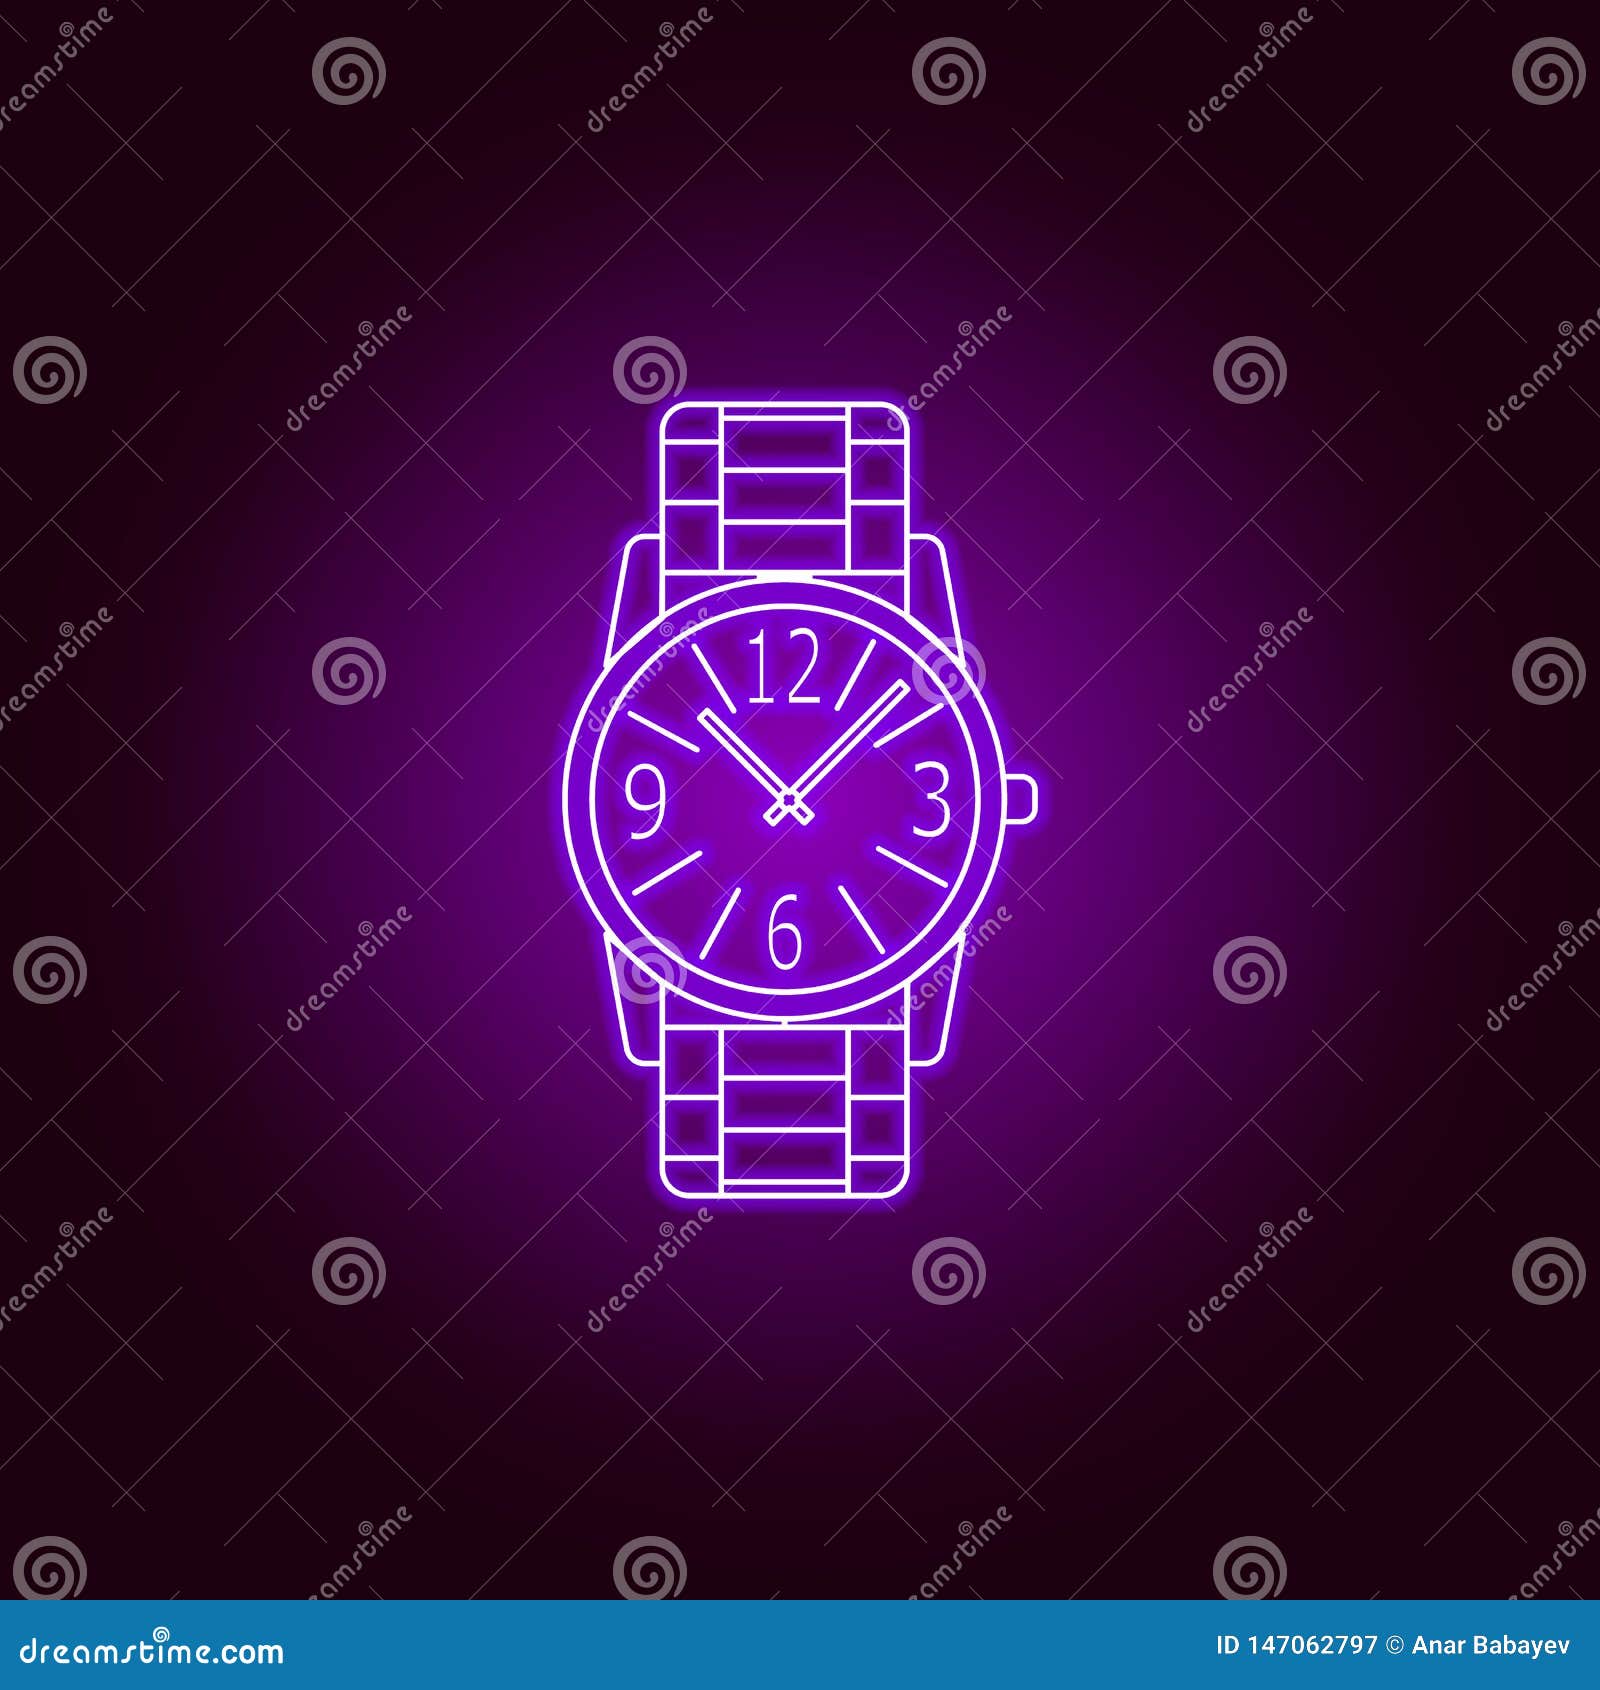 wristwatch with iron strap line icon in neon style. Premium quality graphic design. Signs, symbols collection, simple icon for websites, web design, mobile app on black background